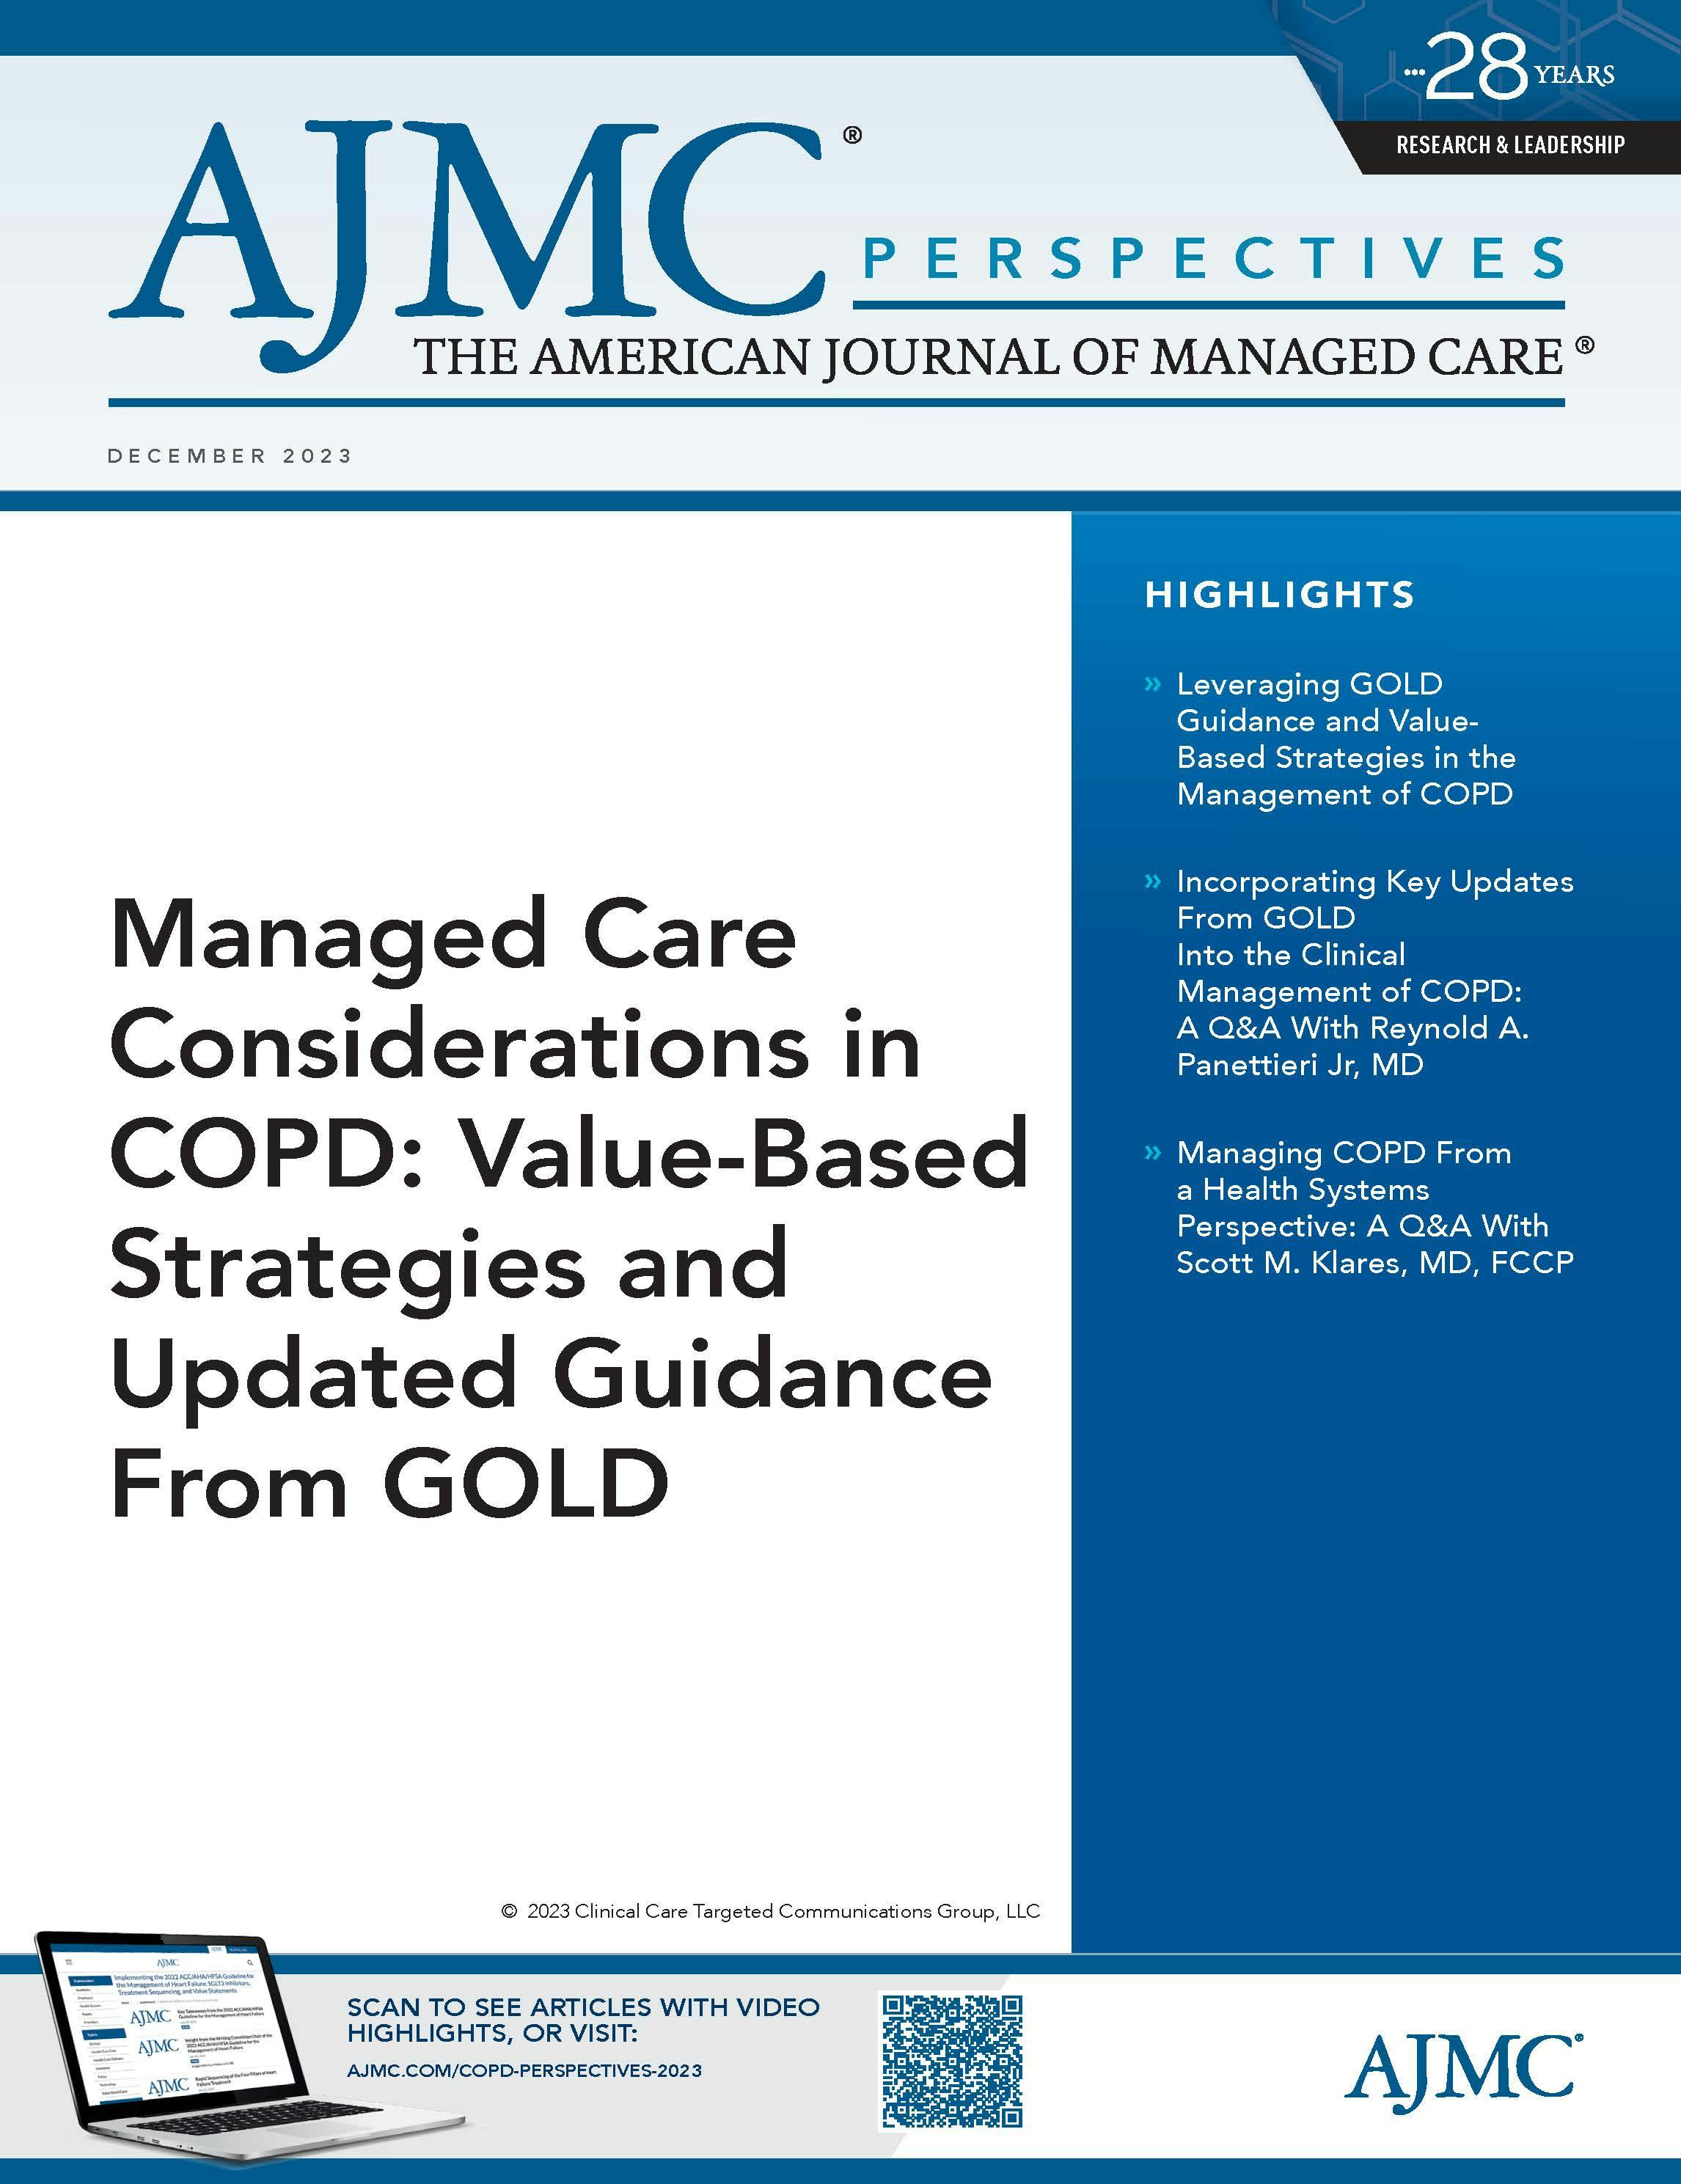 Managed Care Considerations in COPD: Value-Based Strategies and Updated Guidance From GOLD